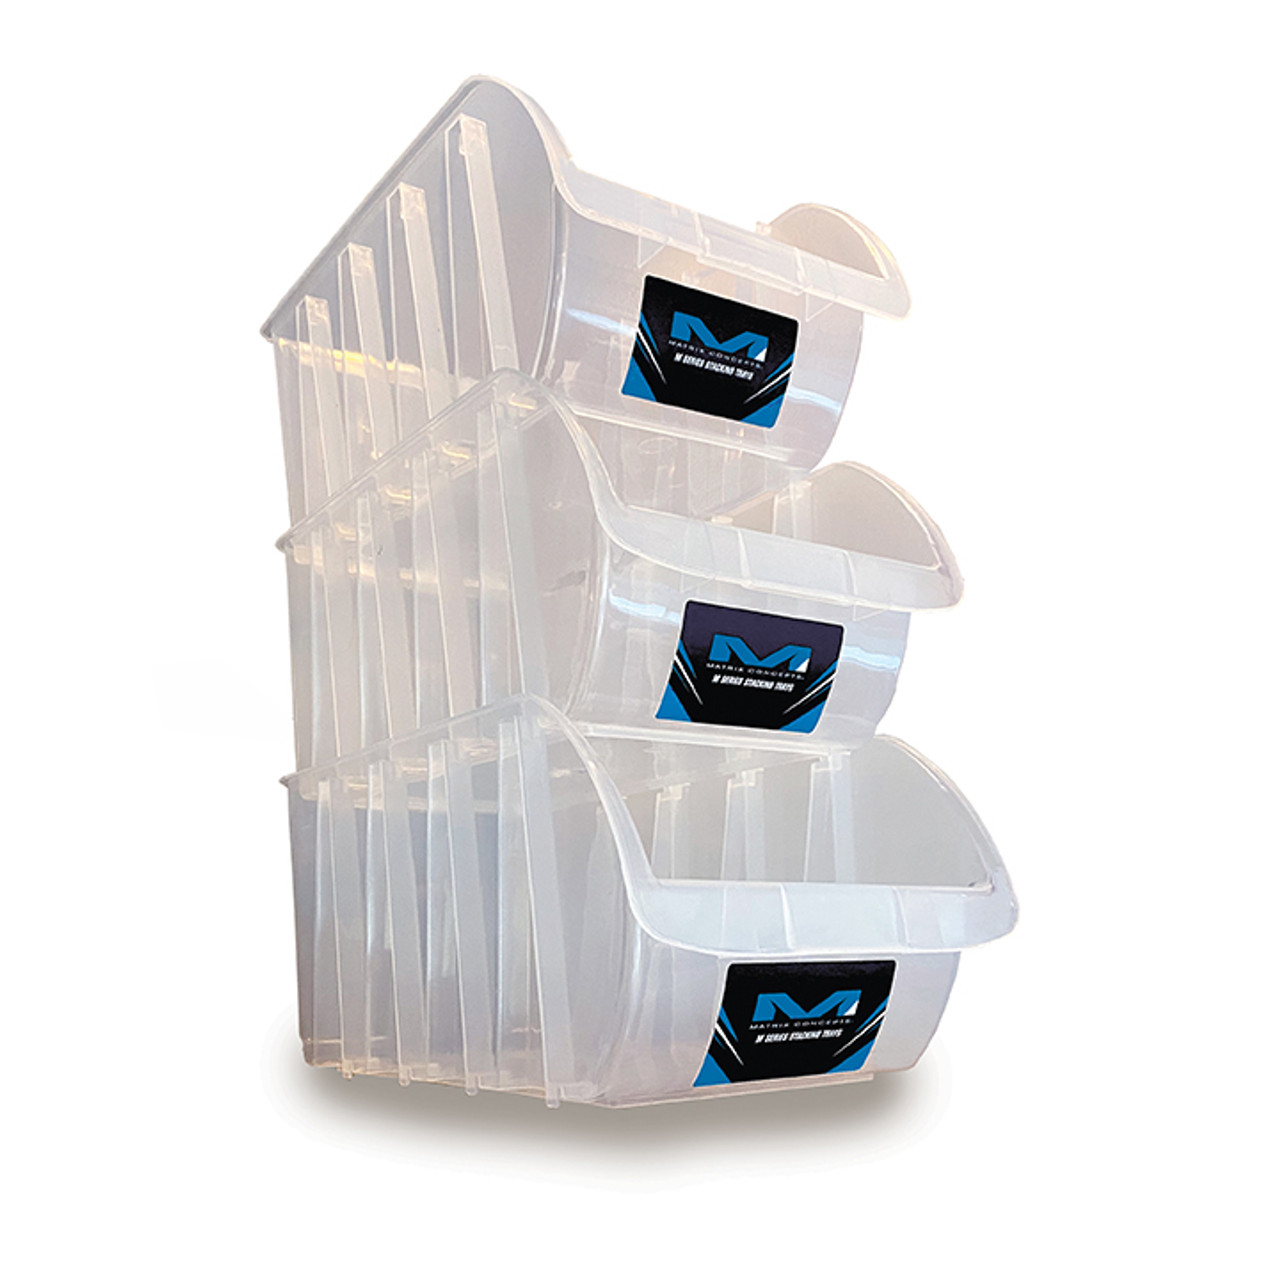 Stackable Plastic Bins, Clear, 10 3/4 x 8 1/4 x 7 for $17.20 Online